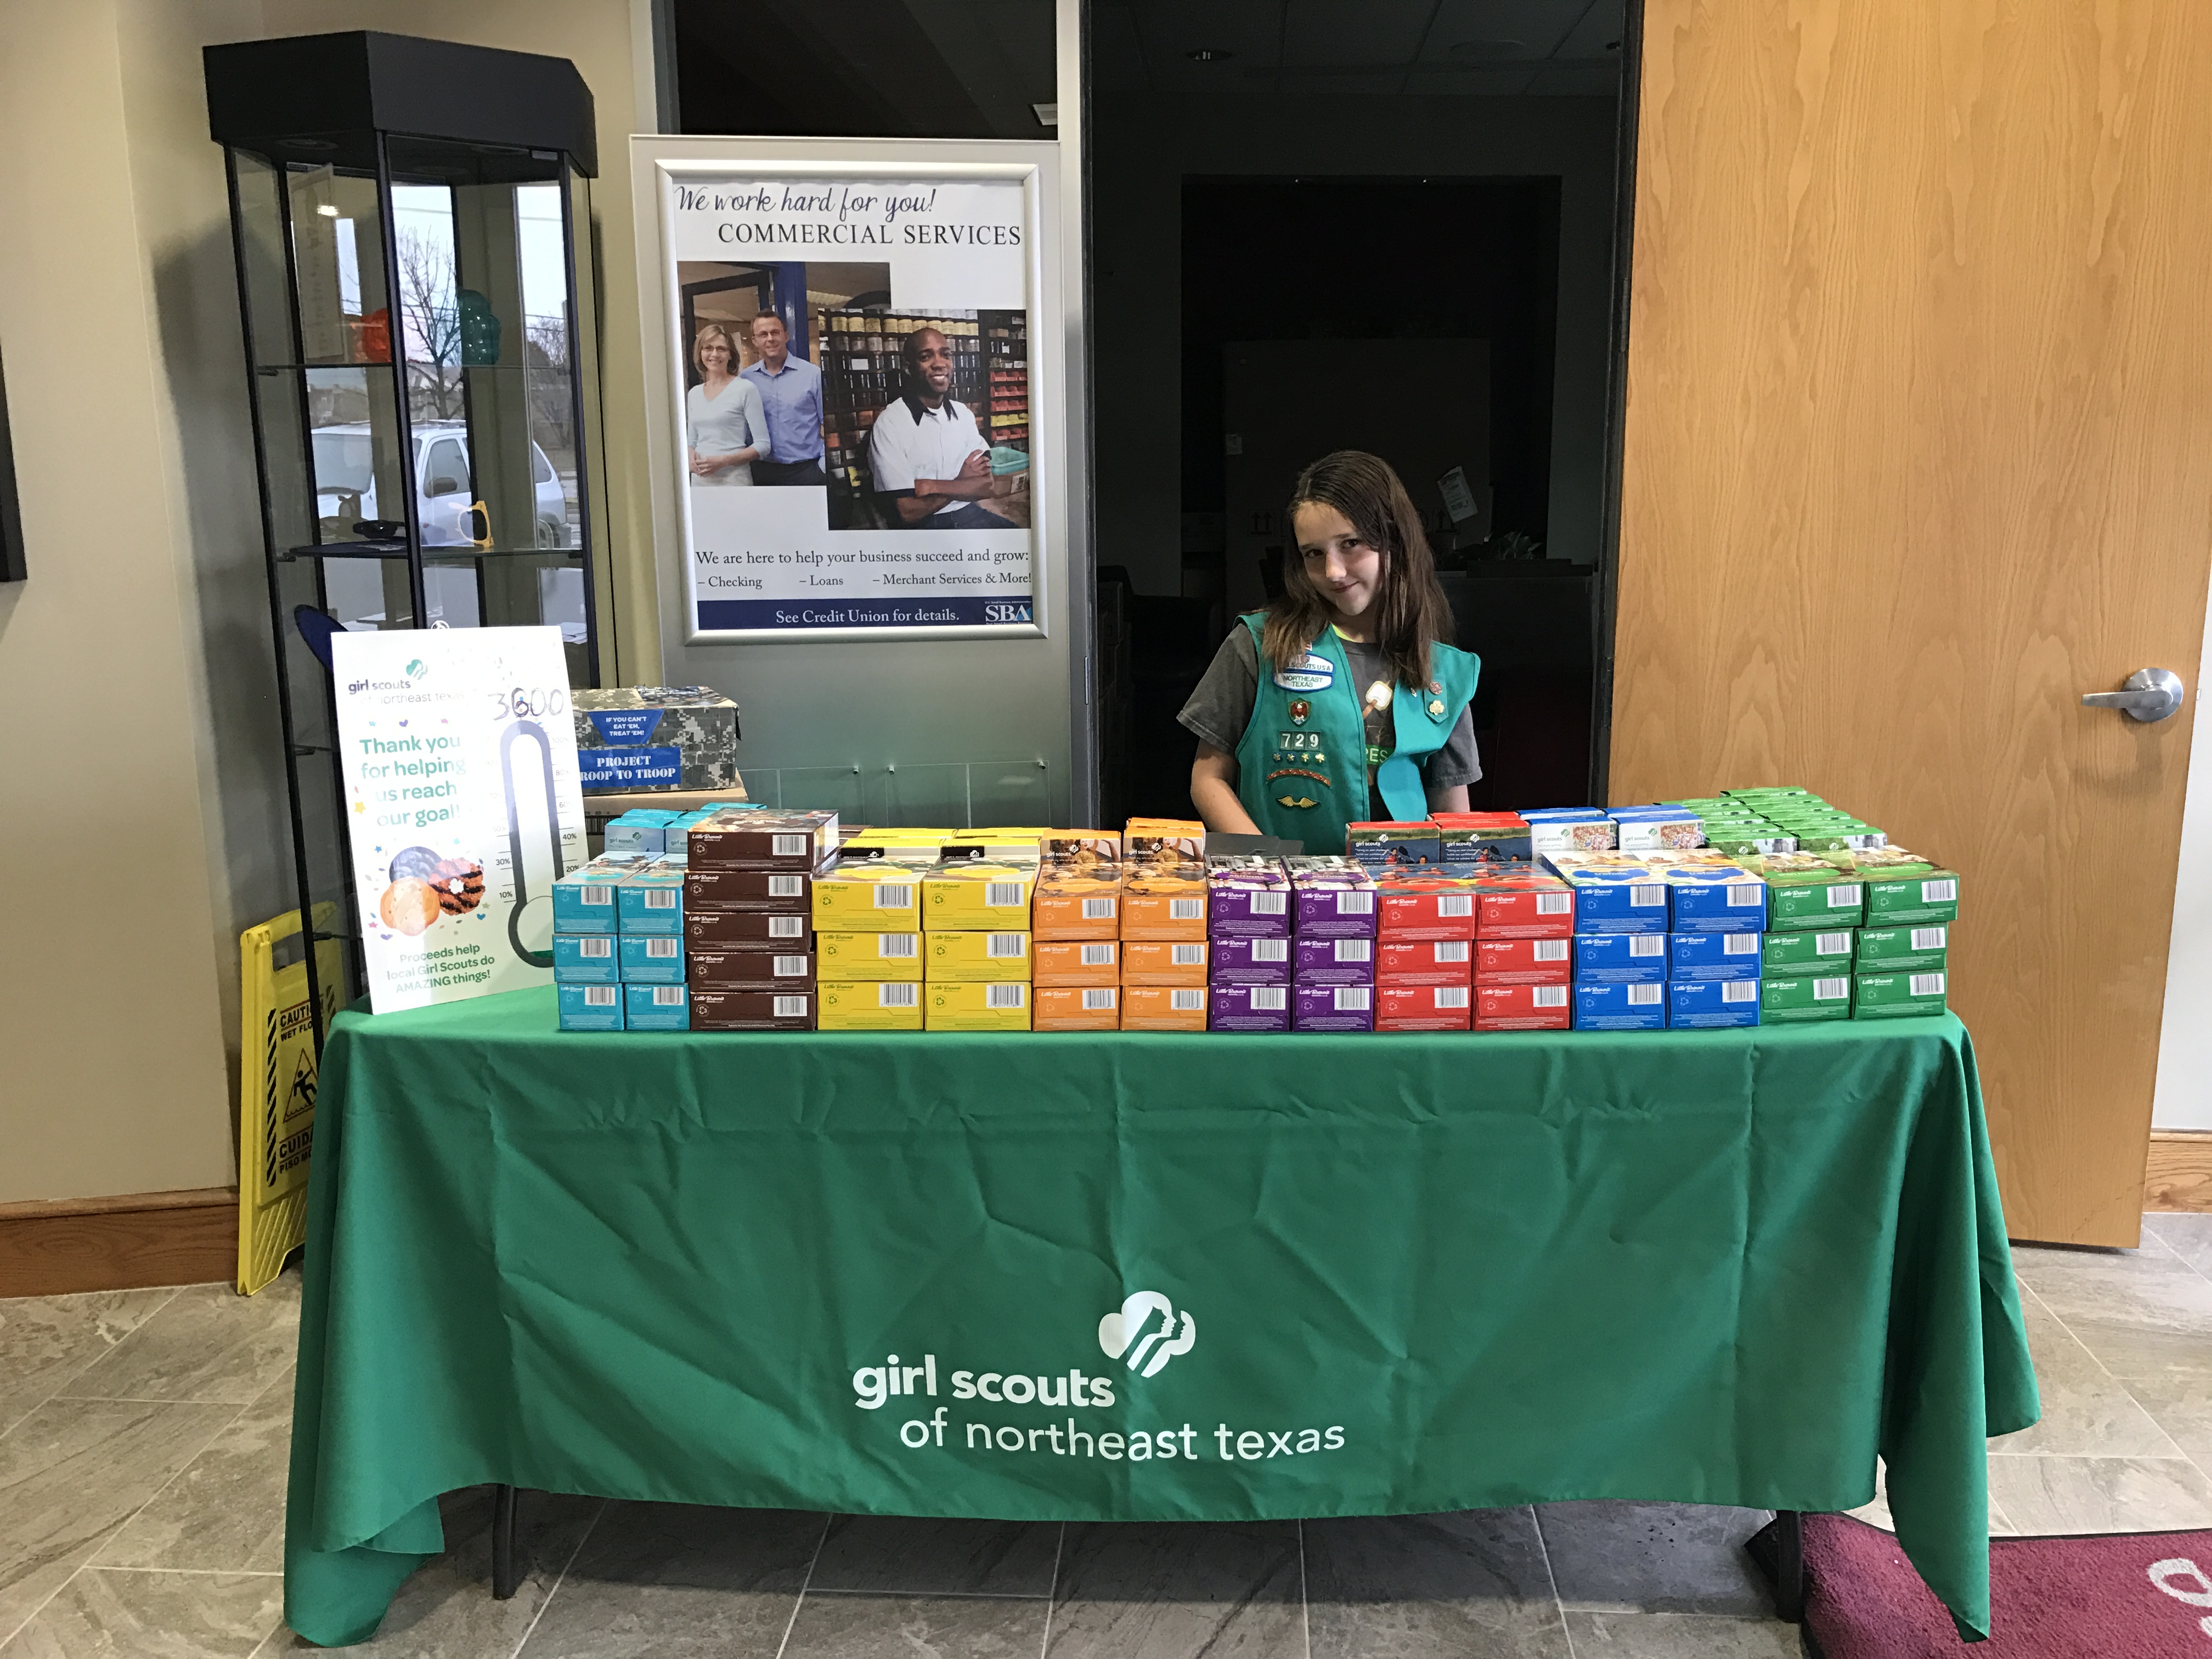 Selling Girl Scout cookies in 2017